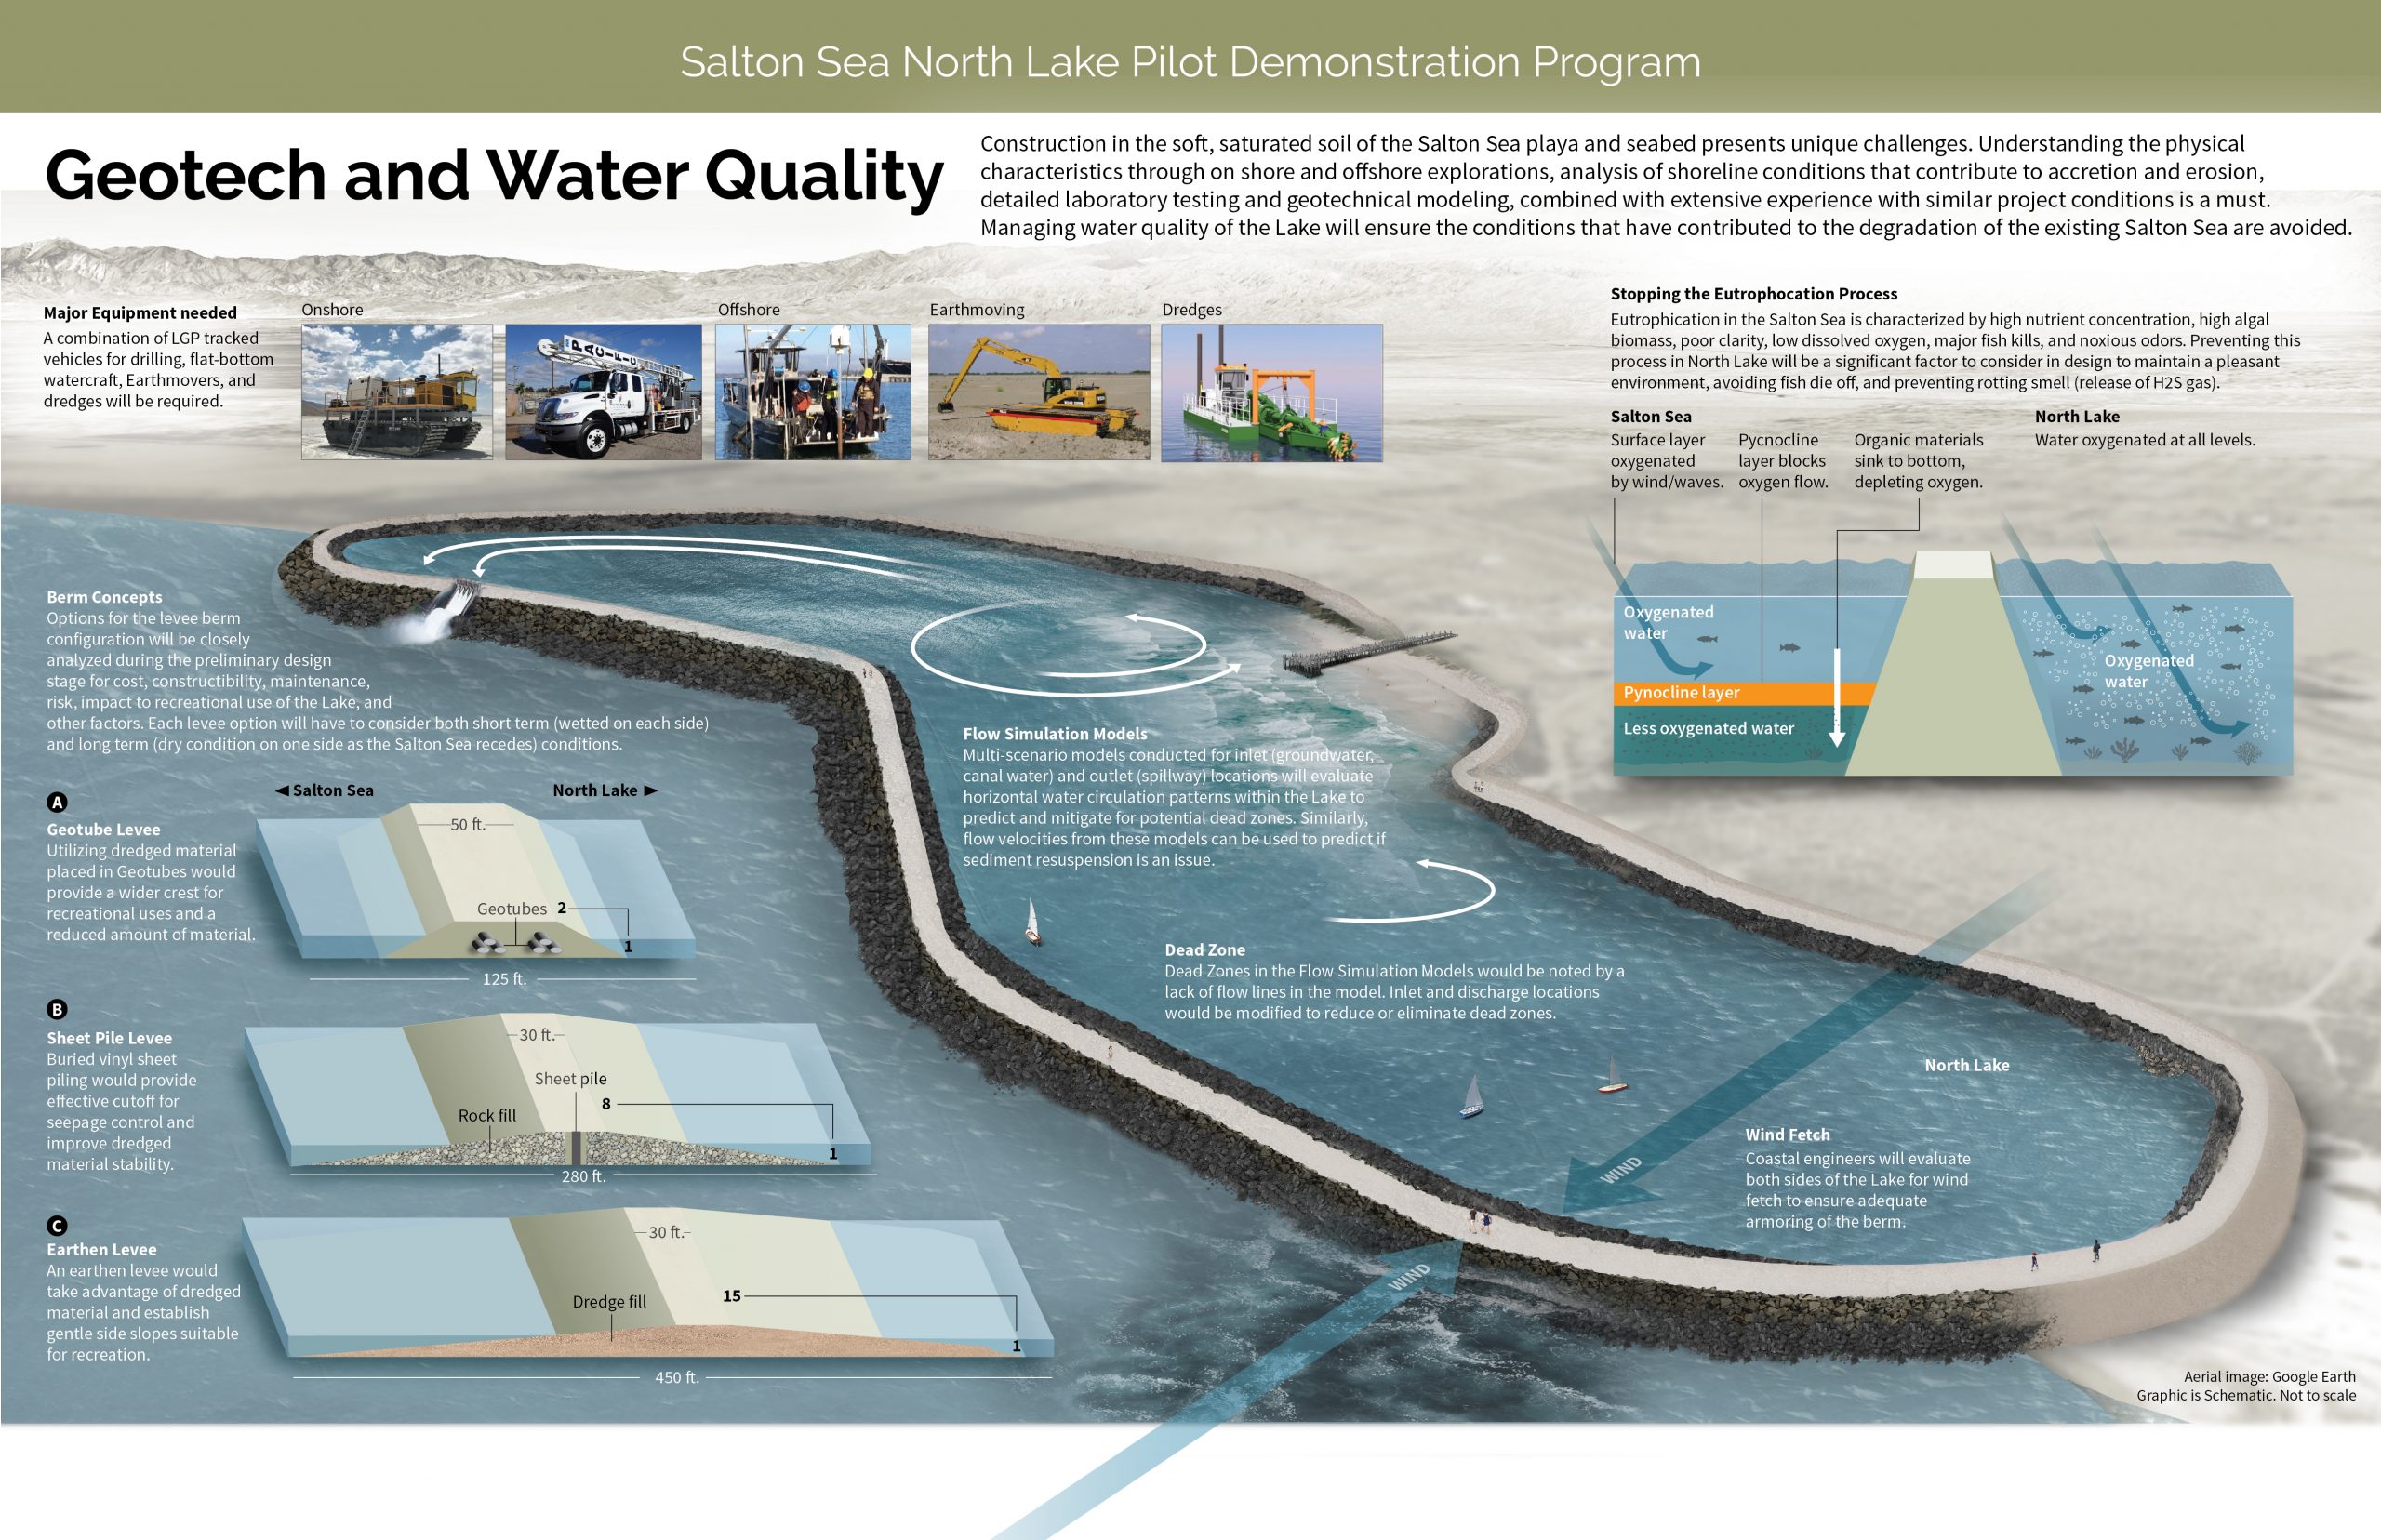 Data visualization by Dudek showing the geotechnical and water quality aspects of a new project at the Salton Sea.